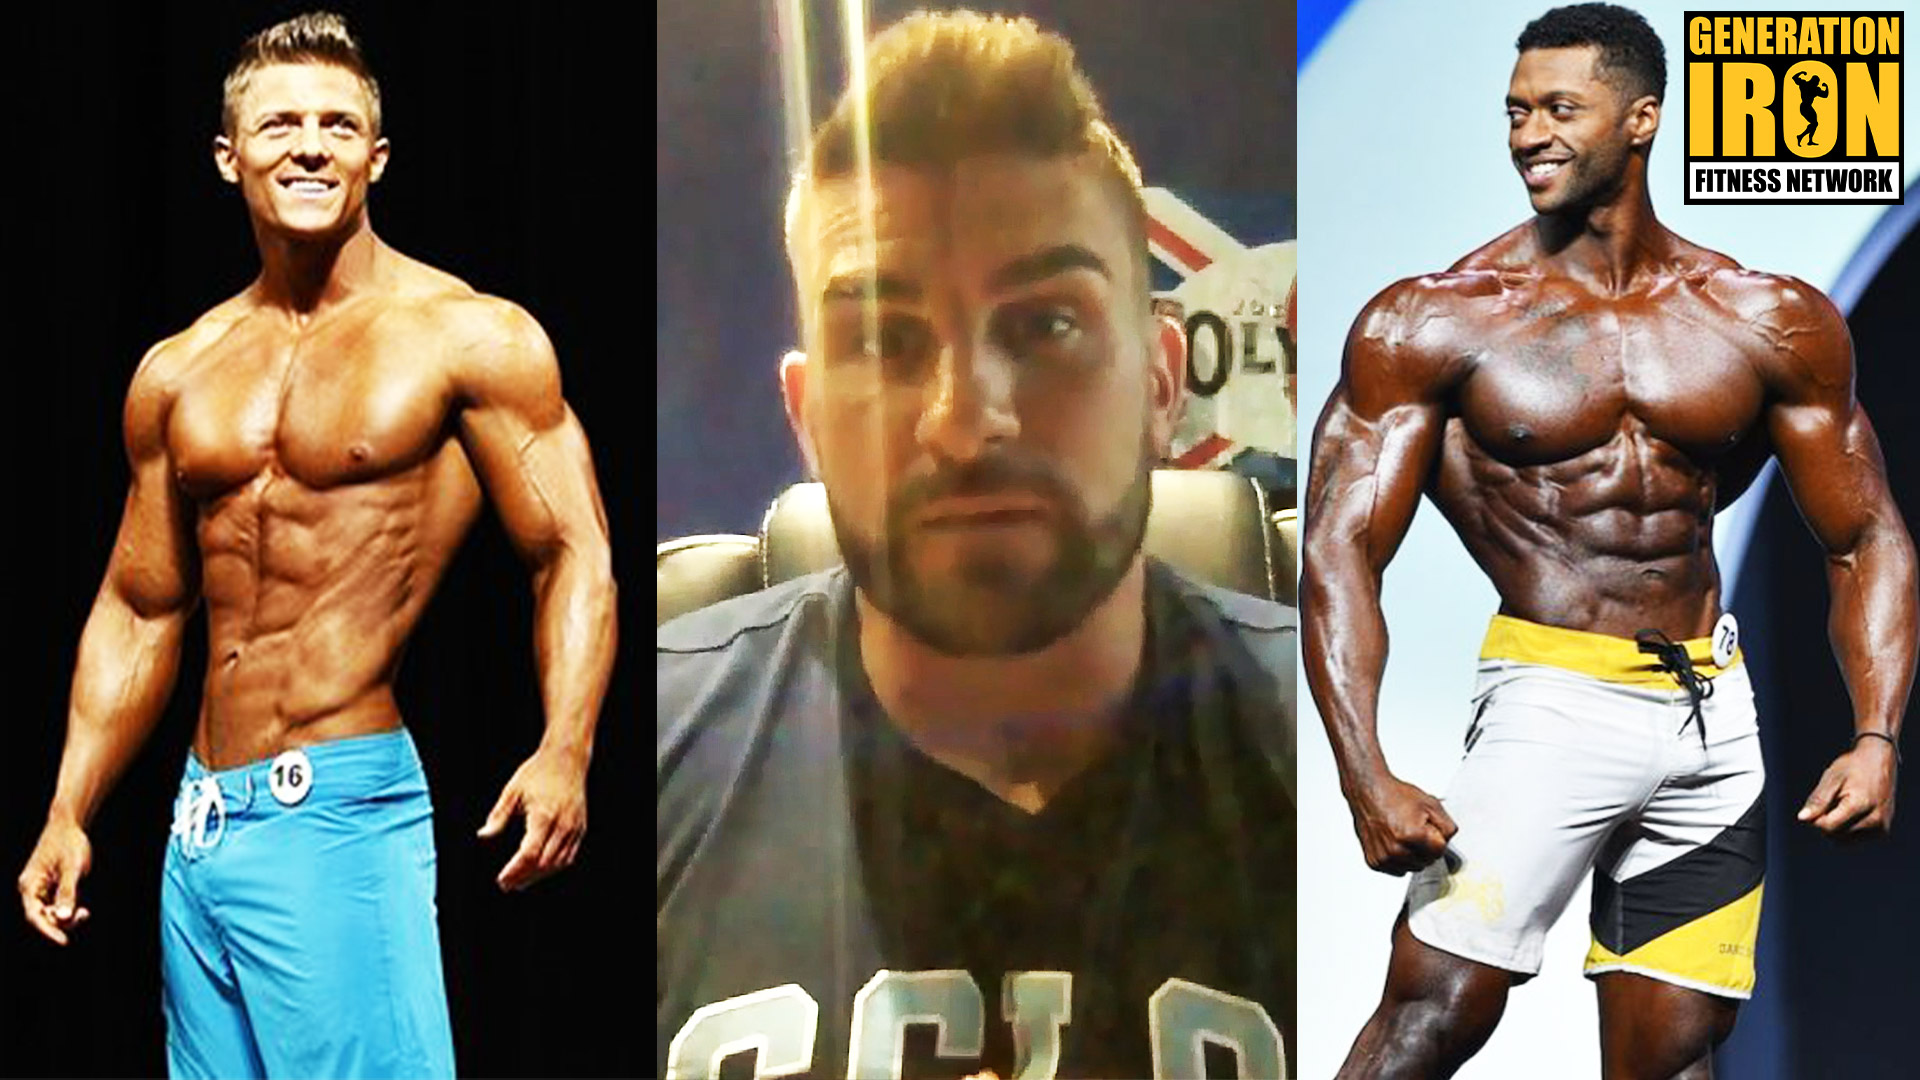 Ryan Terry Answers: Is Men’s Physique Muscle Mass Getting Too Big?